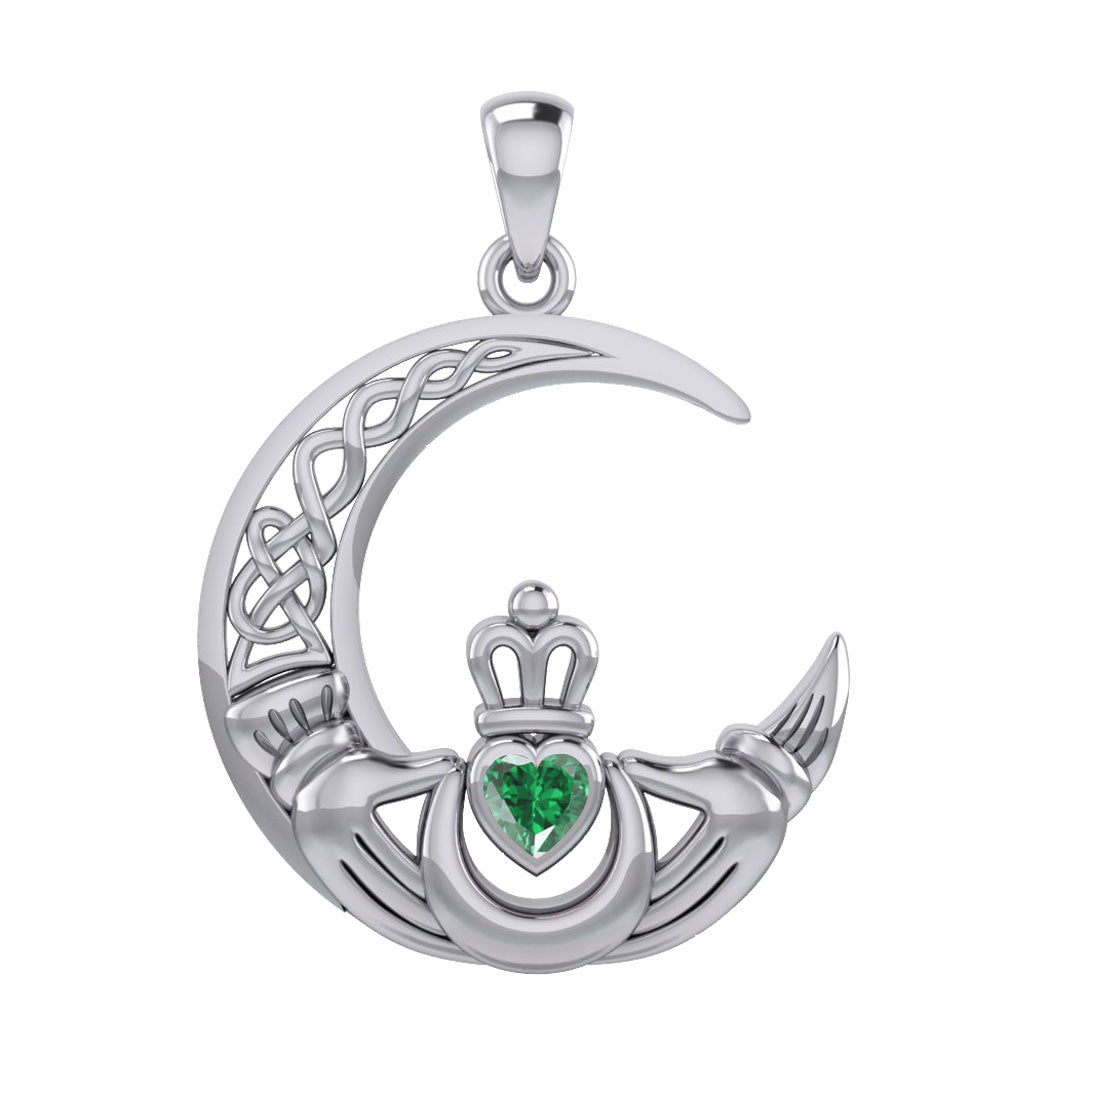 Peter Stone Celtic Crescent Moon Sterling Silver Pendant with  Genuine Gemstone Claddagh Design TPD6193